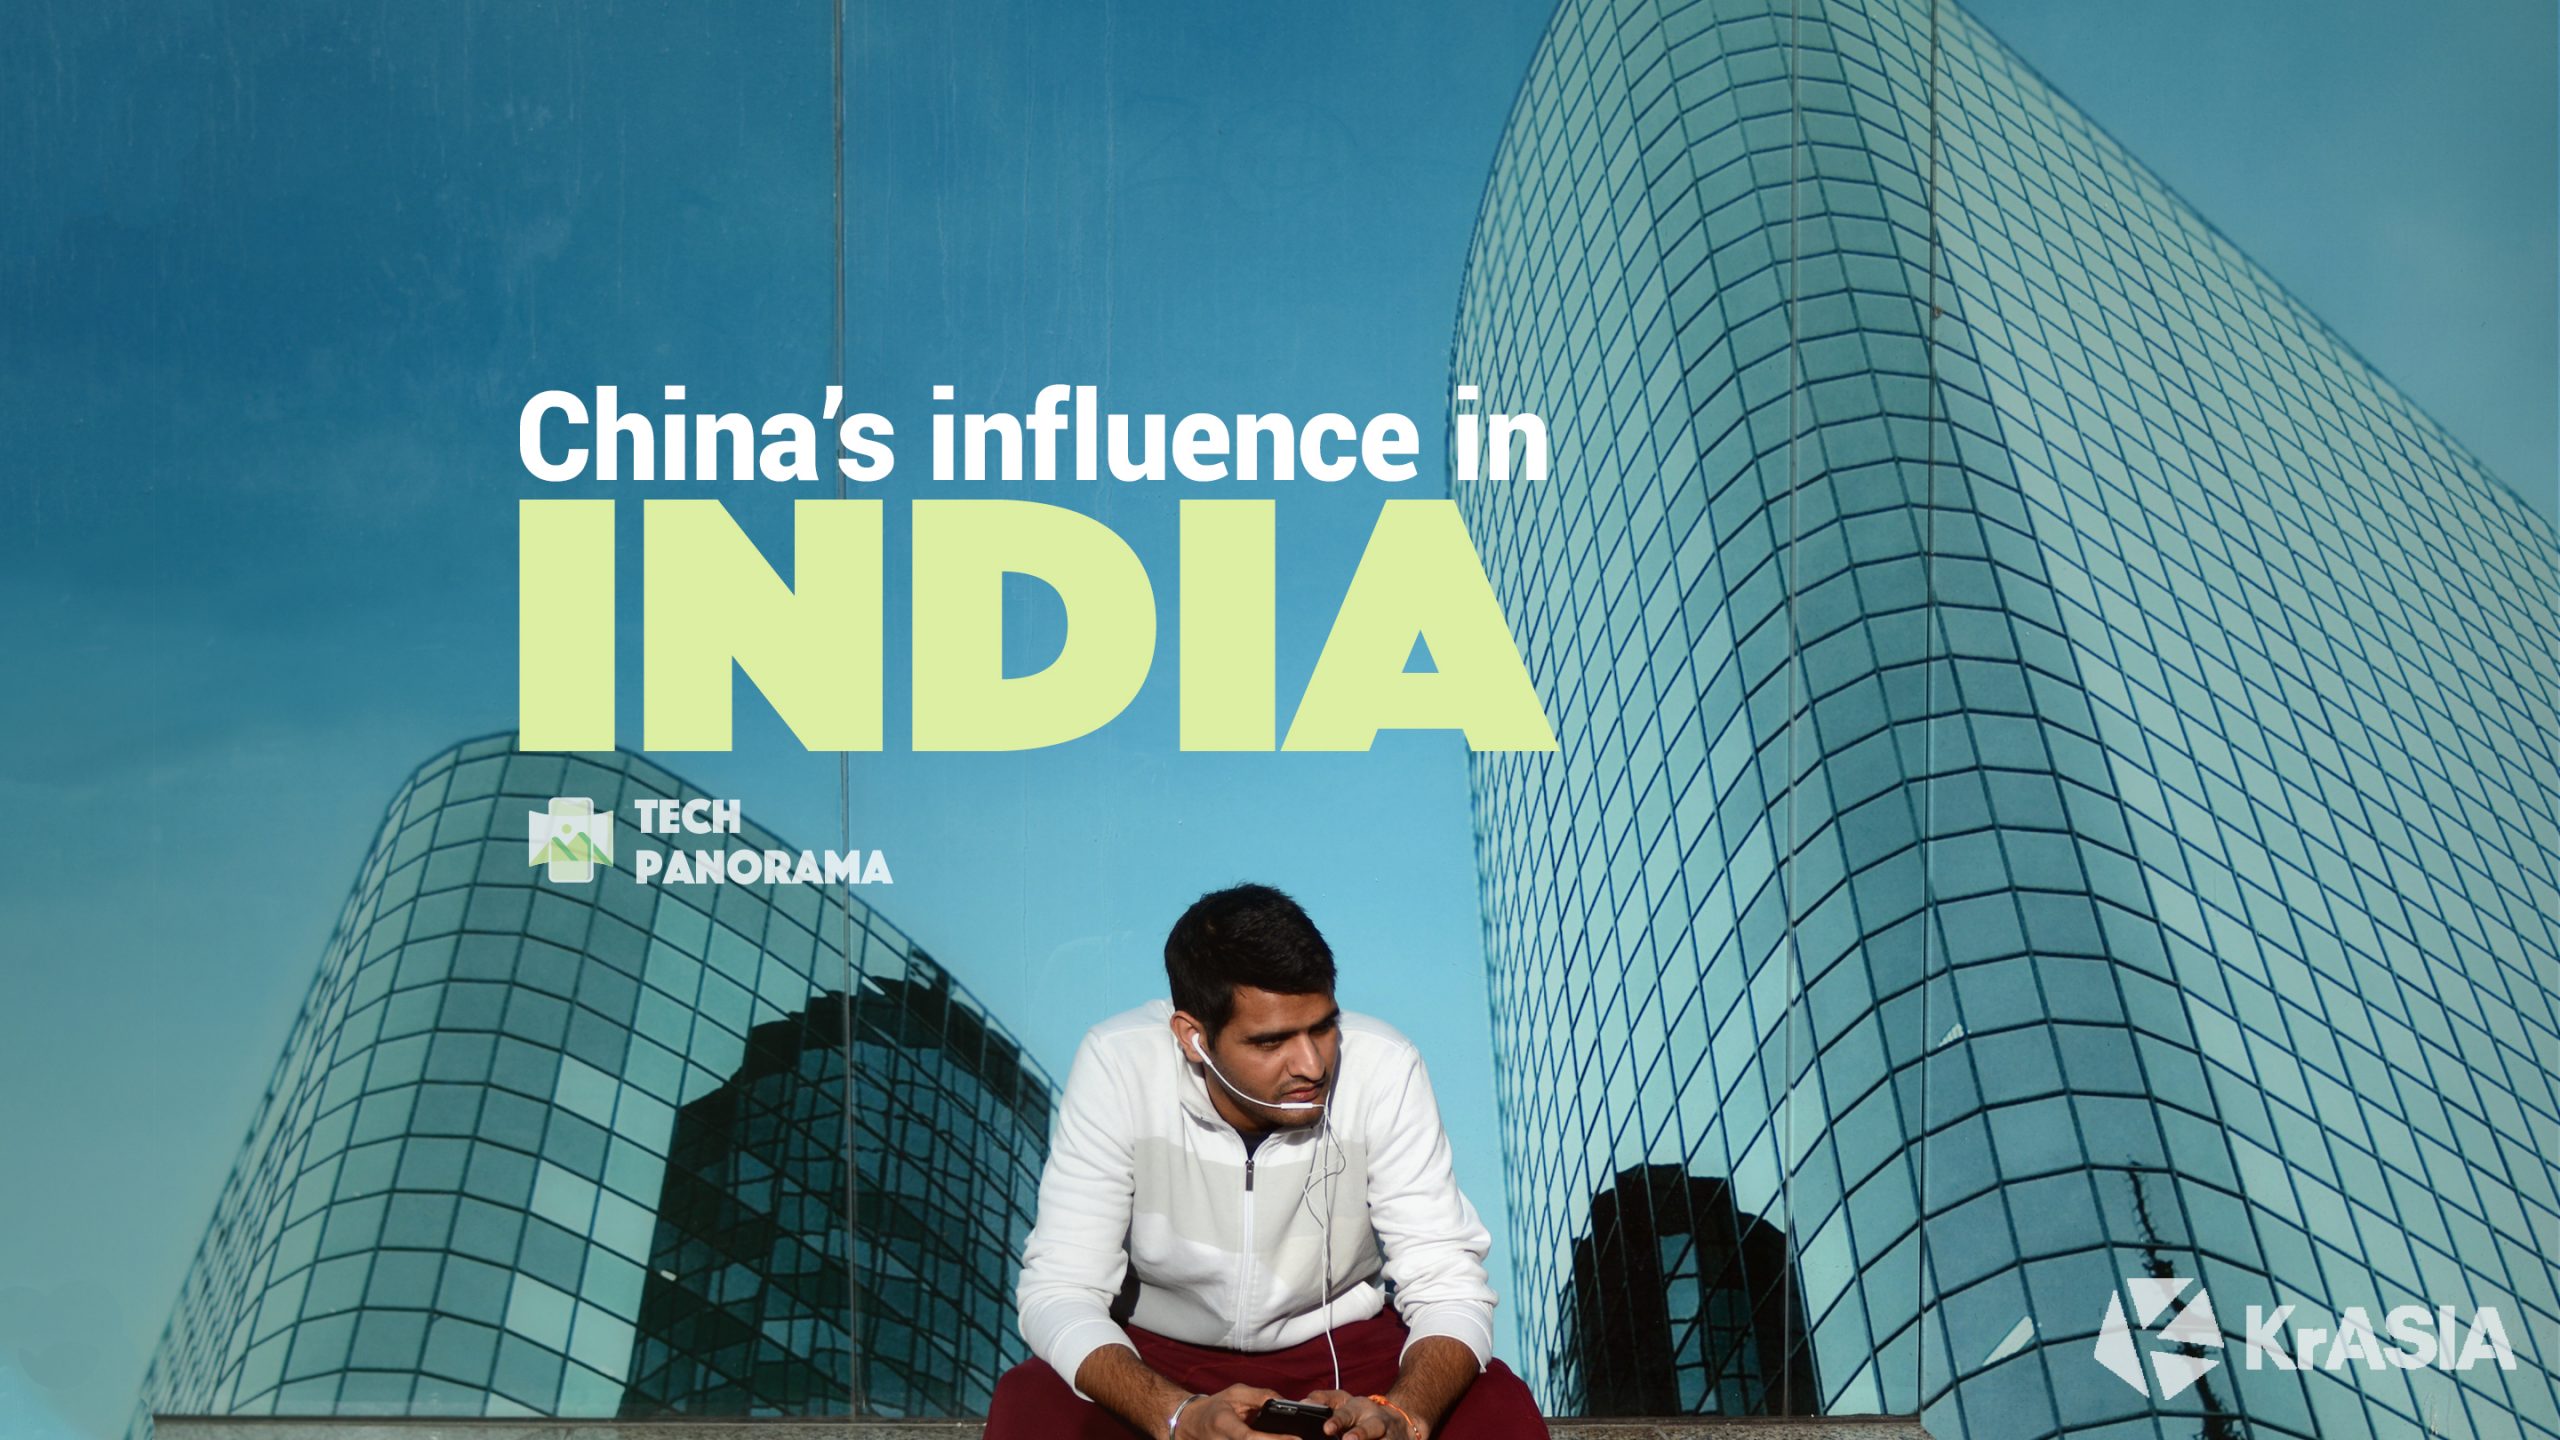 TECH PANORAMA | China and India tech ecosystems are more connected than you think